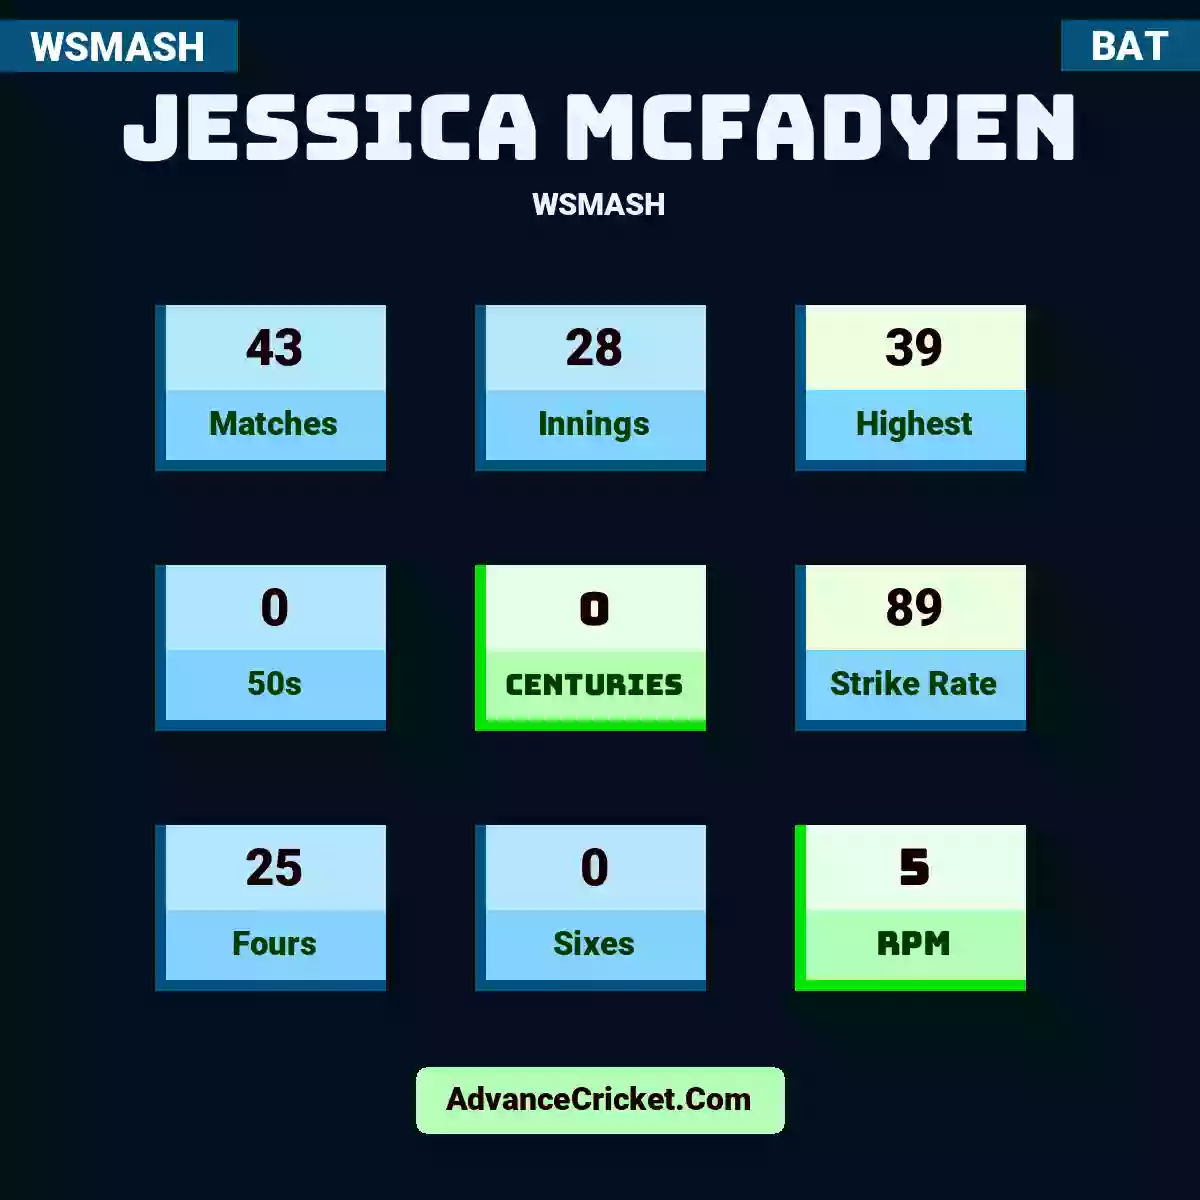 Jessica McFadyen WSMASH , Jessica McFadyen played 43 matches, scored 39 runs as highest, 0 half-centuries, and 0 centuries, with a strike rate of 89. J.McFadyen hit 25 fours and 0 sixes, with an RPM of 5.